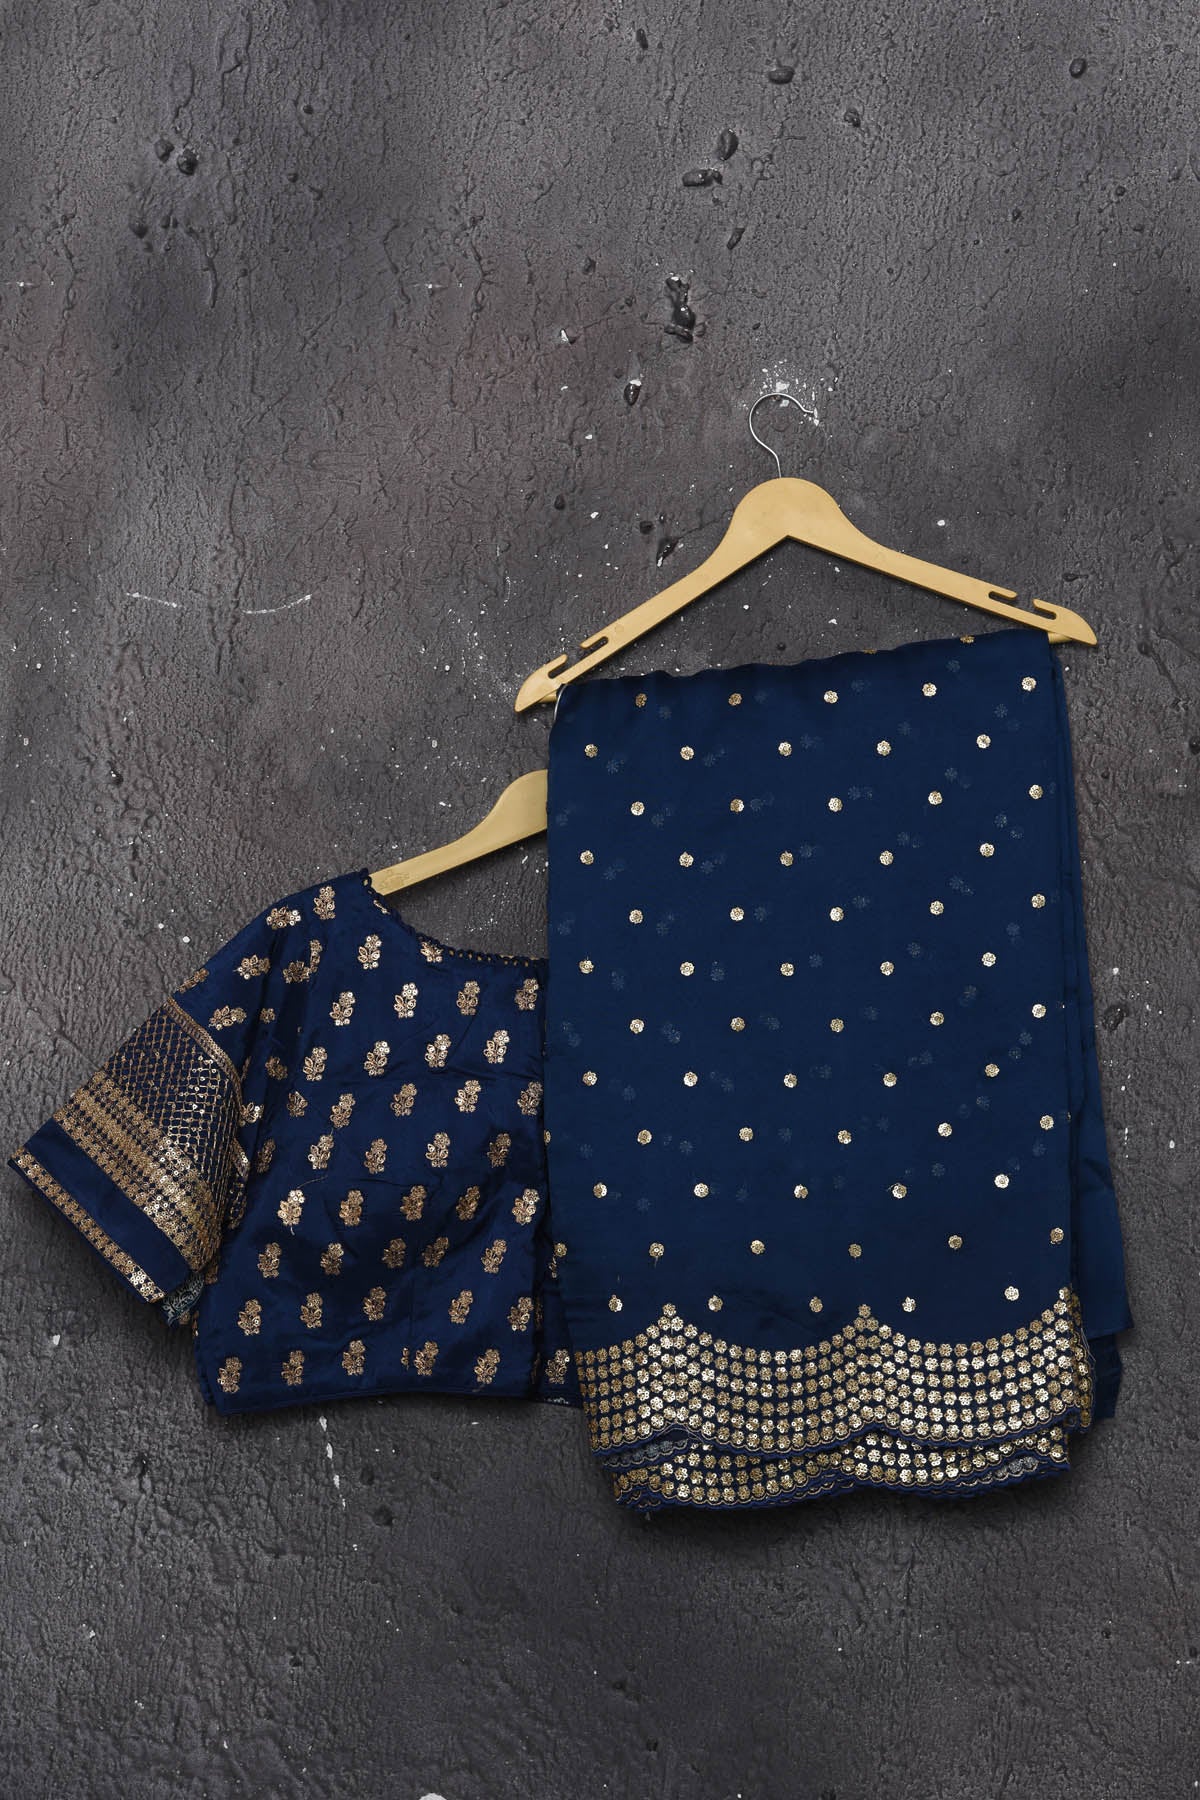 Buy exquisite navy blue organza saree with golden embroidered online in USA. Pure organza sarees by Pure Elegance in blue color. It has a beautiful gold embroidered border. This organza brings the charm and simplicity of this saree with border and pallu with the delegate embroidery work on border. Shop this designer silk sari from Pure Elegance Indian fashion store in USA.-Ready blouse.